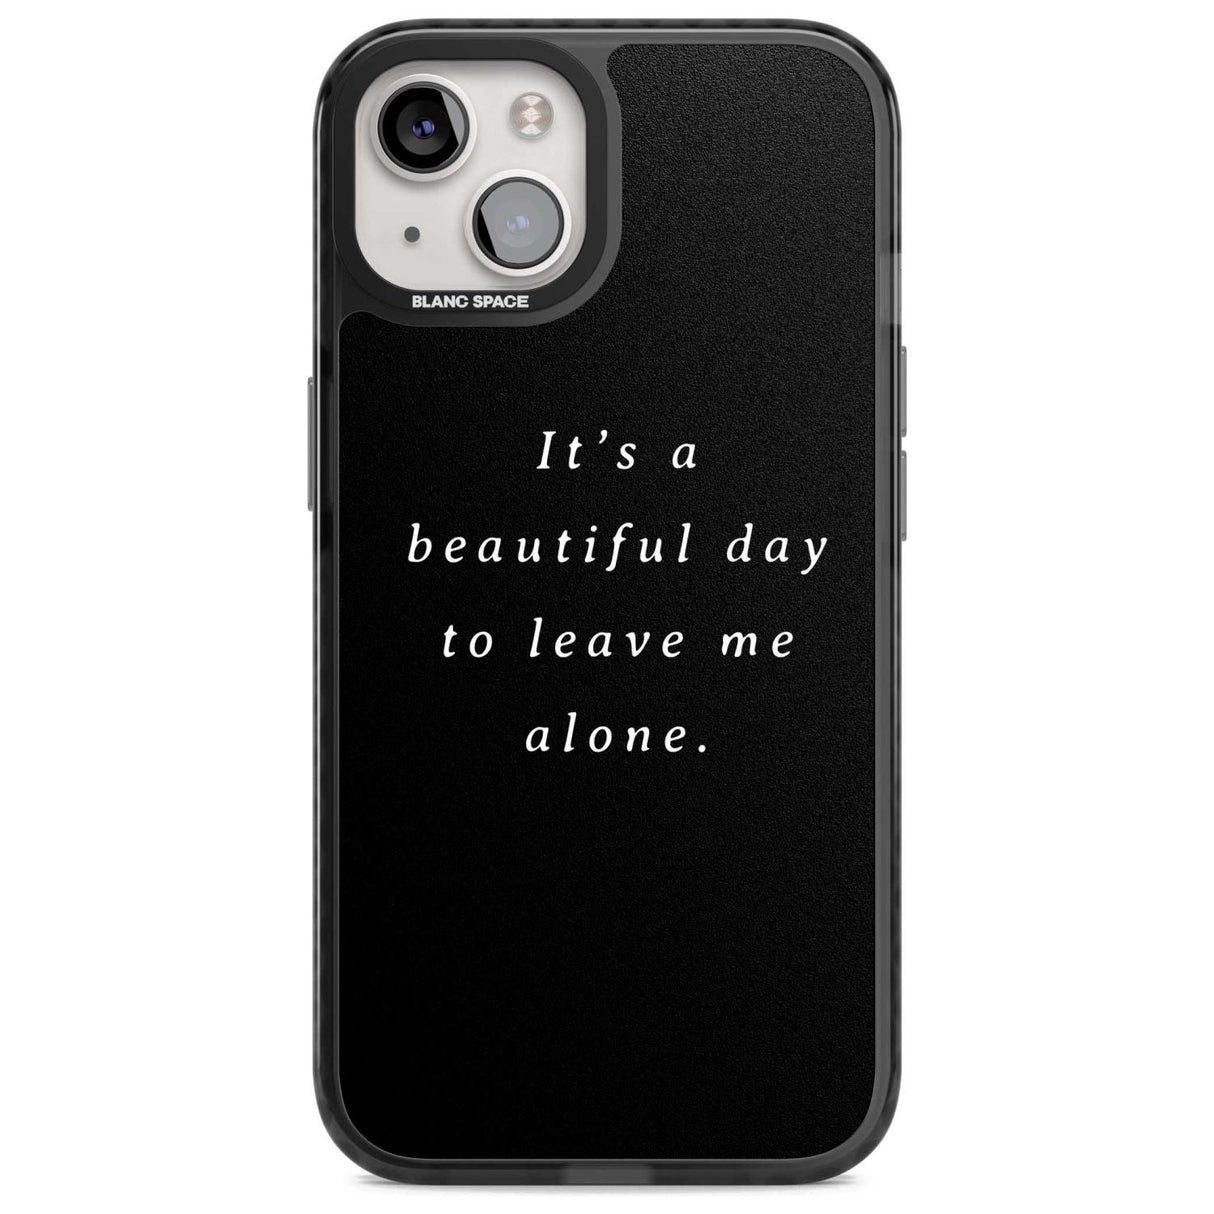 Leave me alone Phone Case iPhone 15 Plus / Magsafe Black Impact Case,iPhone 15 / Magsafe Black Impact Case,iPhone 14 Plus / Magsafe Black Impact Case,iPhone 14 / Magsafe Black Impact Case,iPhone 13 / Magsafe Black Impact Case Blanc Space